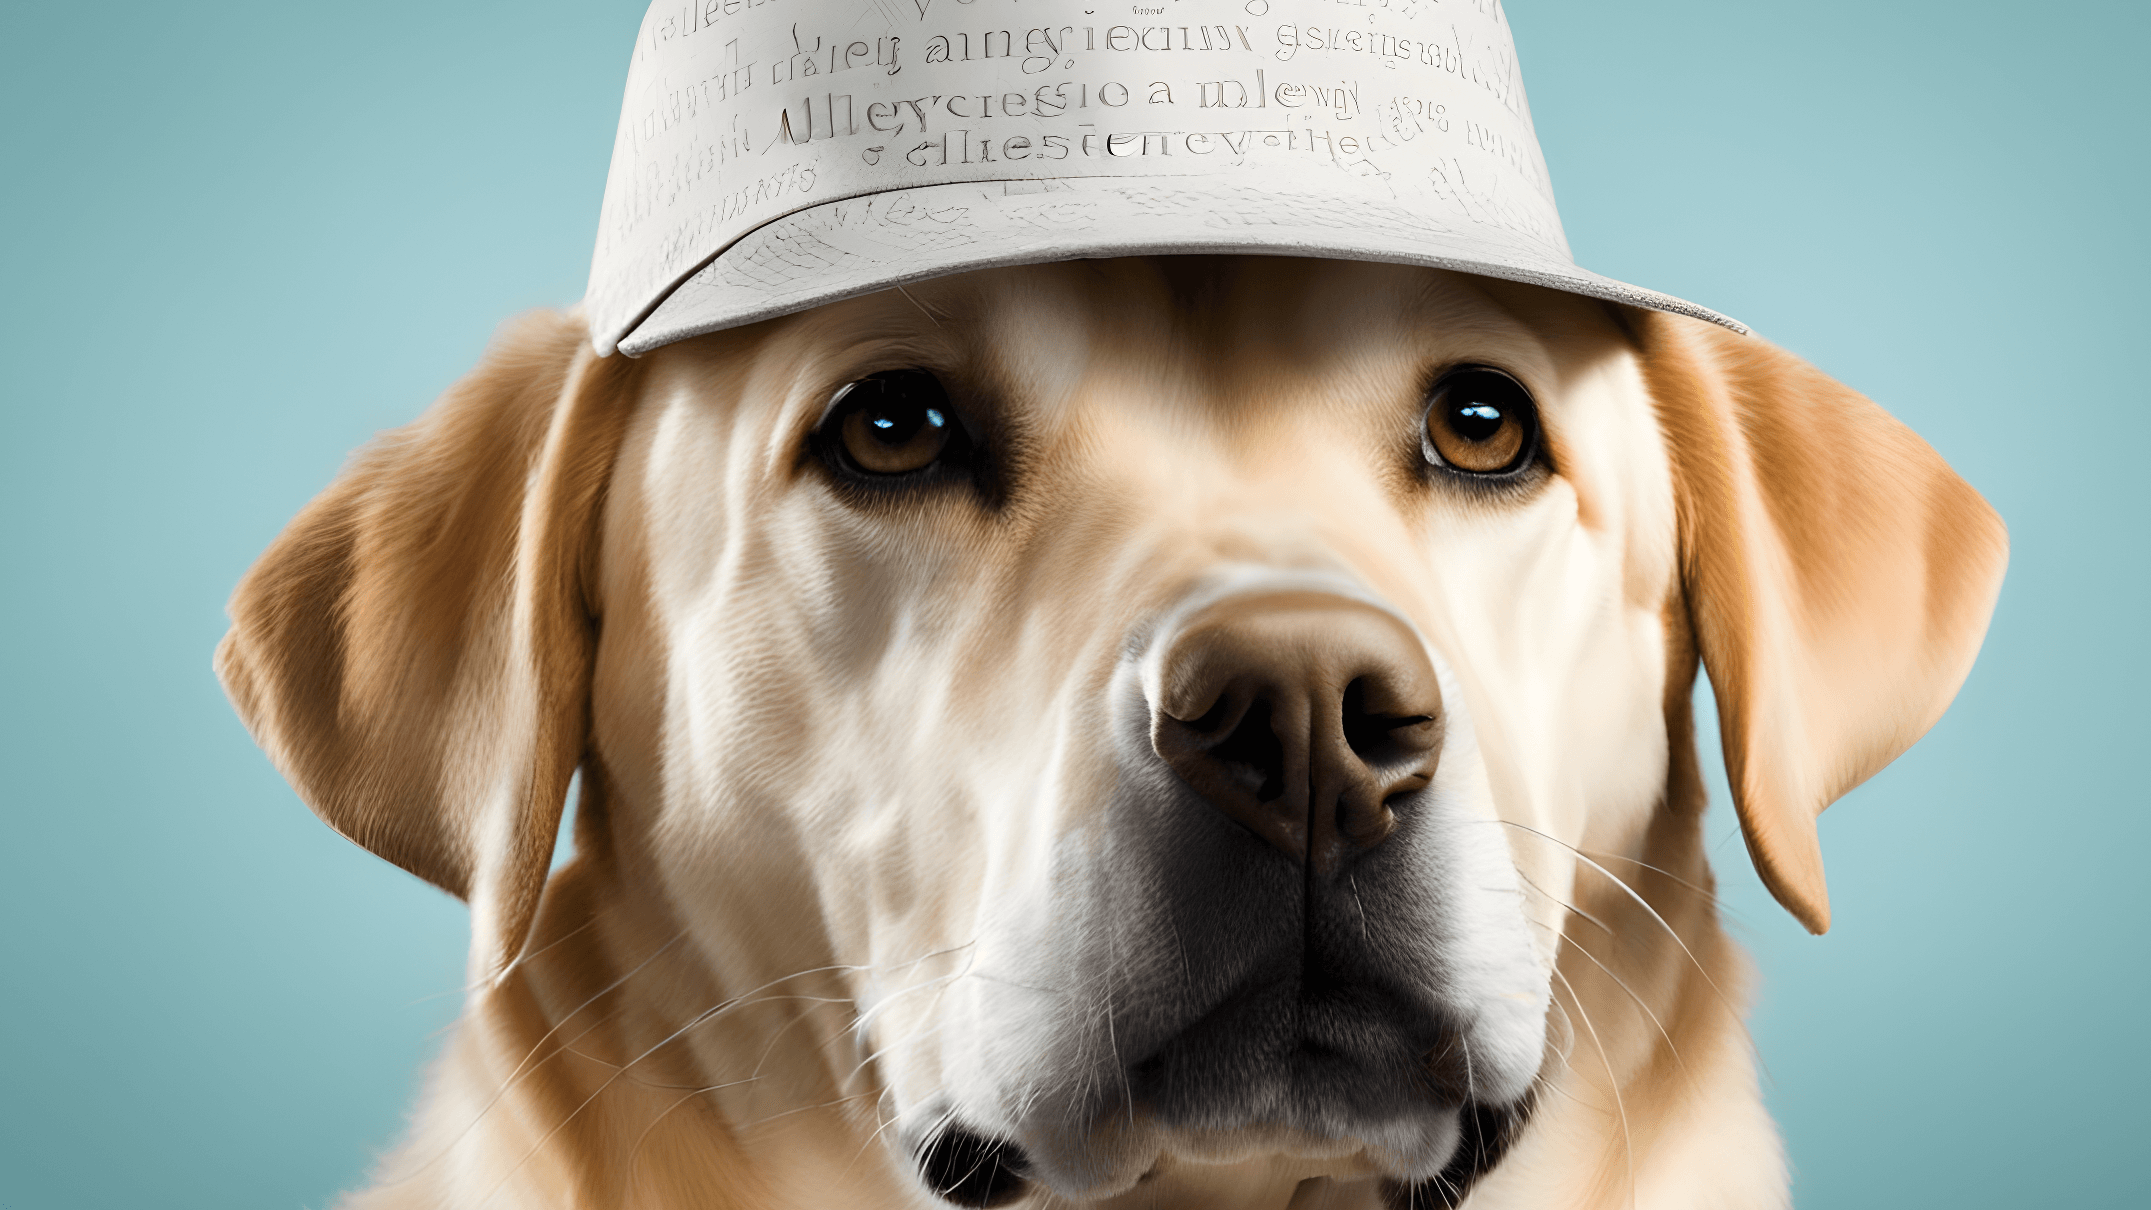 A Labrador Retriever wearing a cute thinking cap, pondering the mysteries of allergies